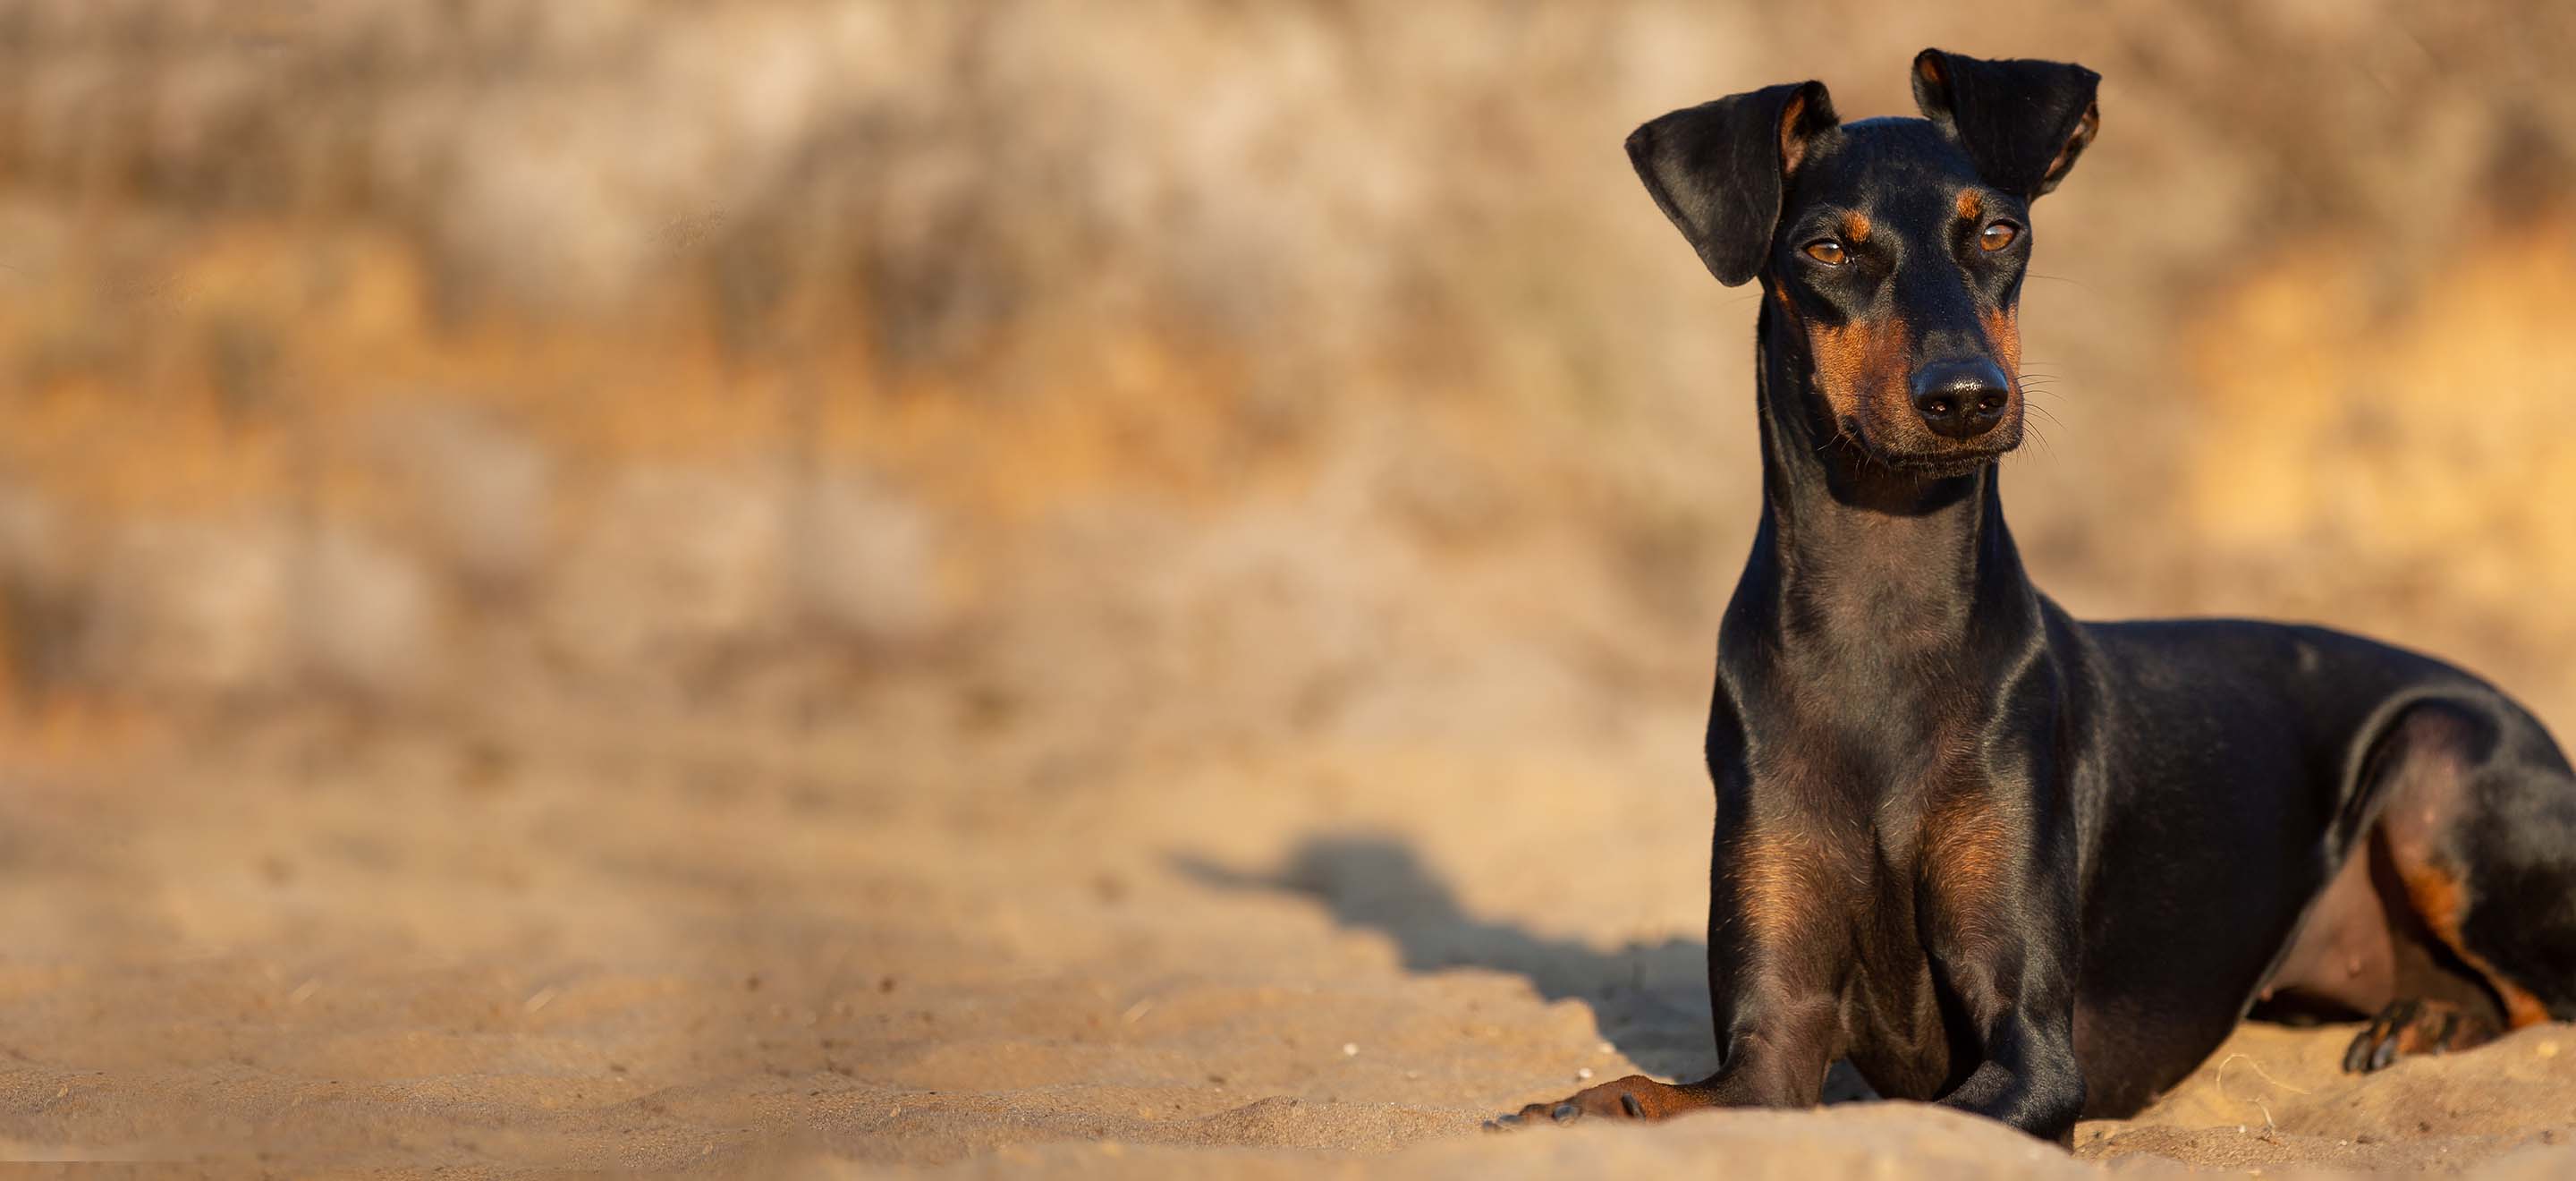 A Manchester Terrier dog laying in the sand in the desert image